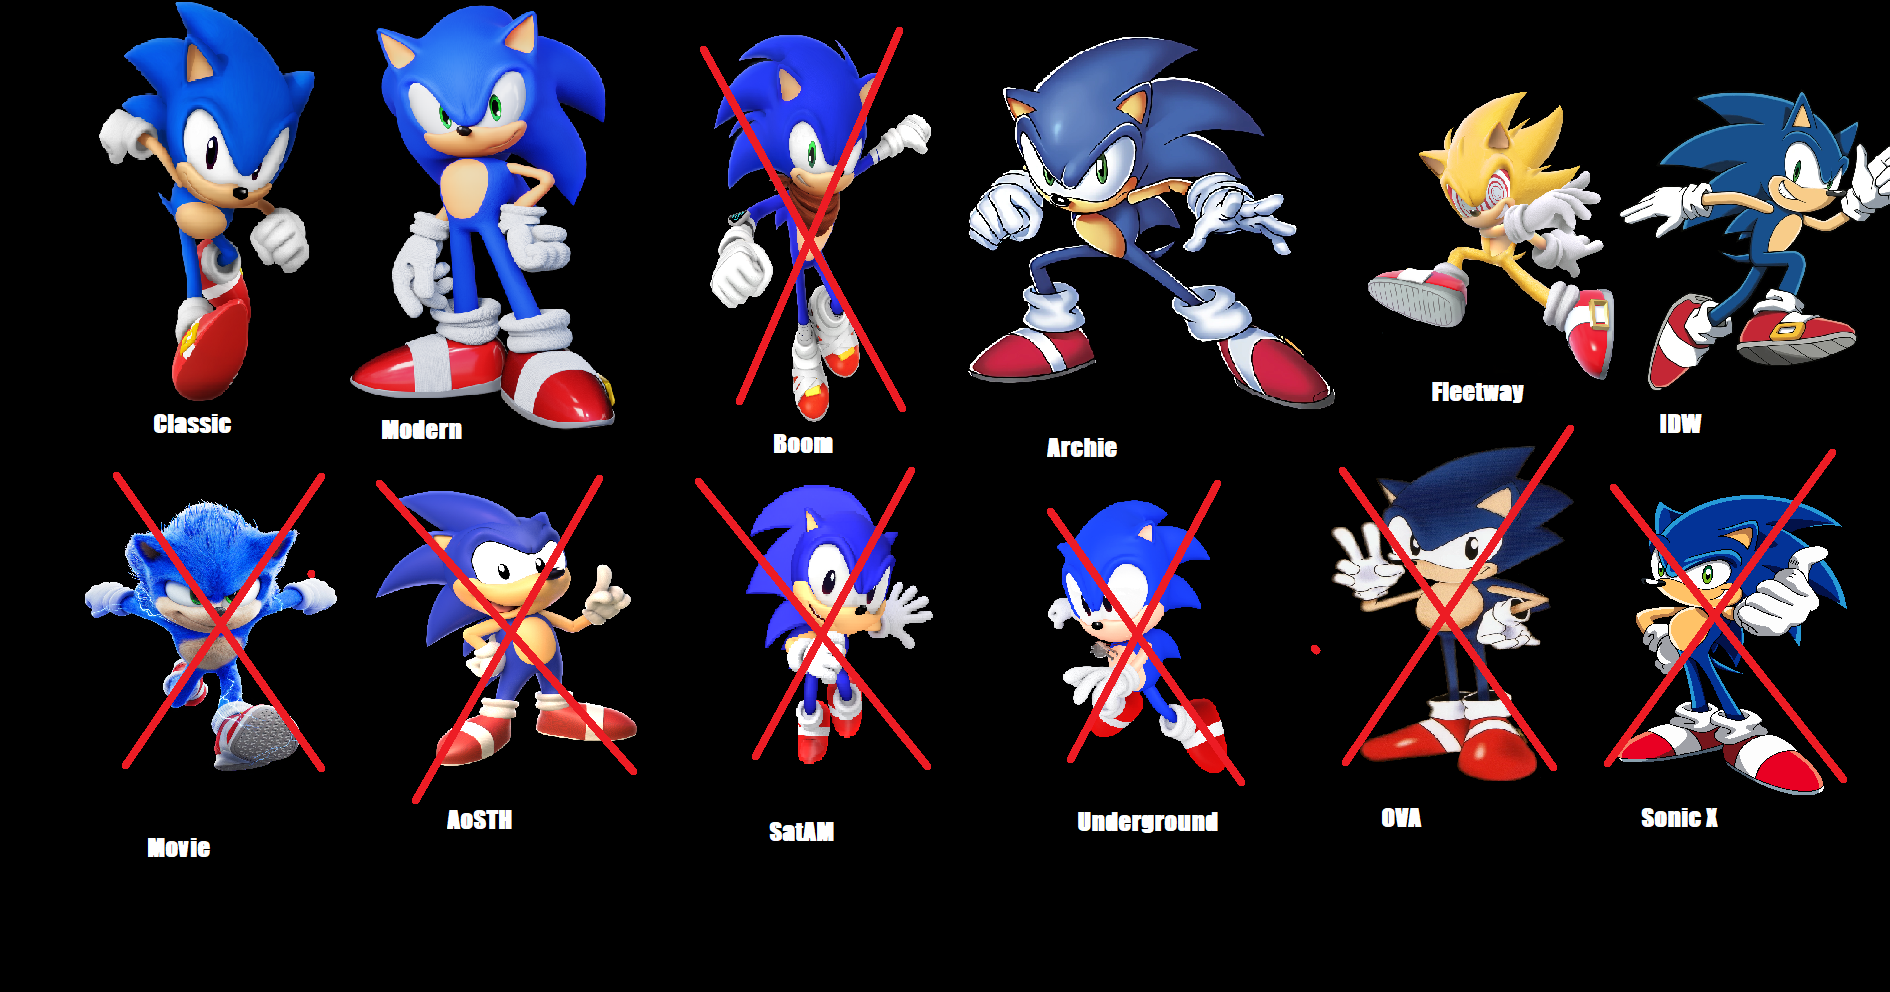 Who should Fleetway Sonic face off if she was in DB?